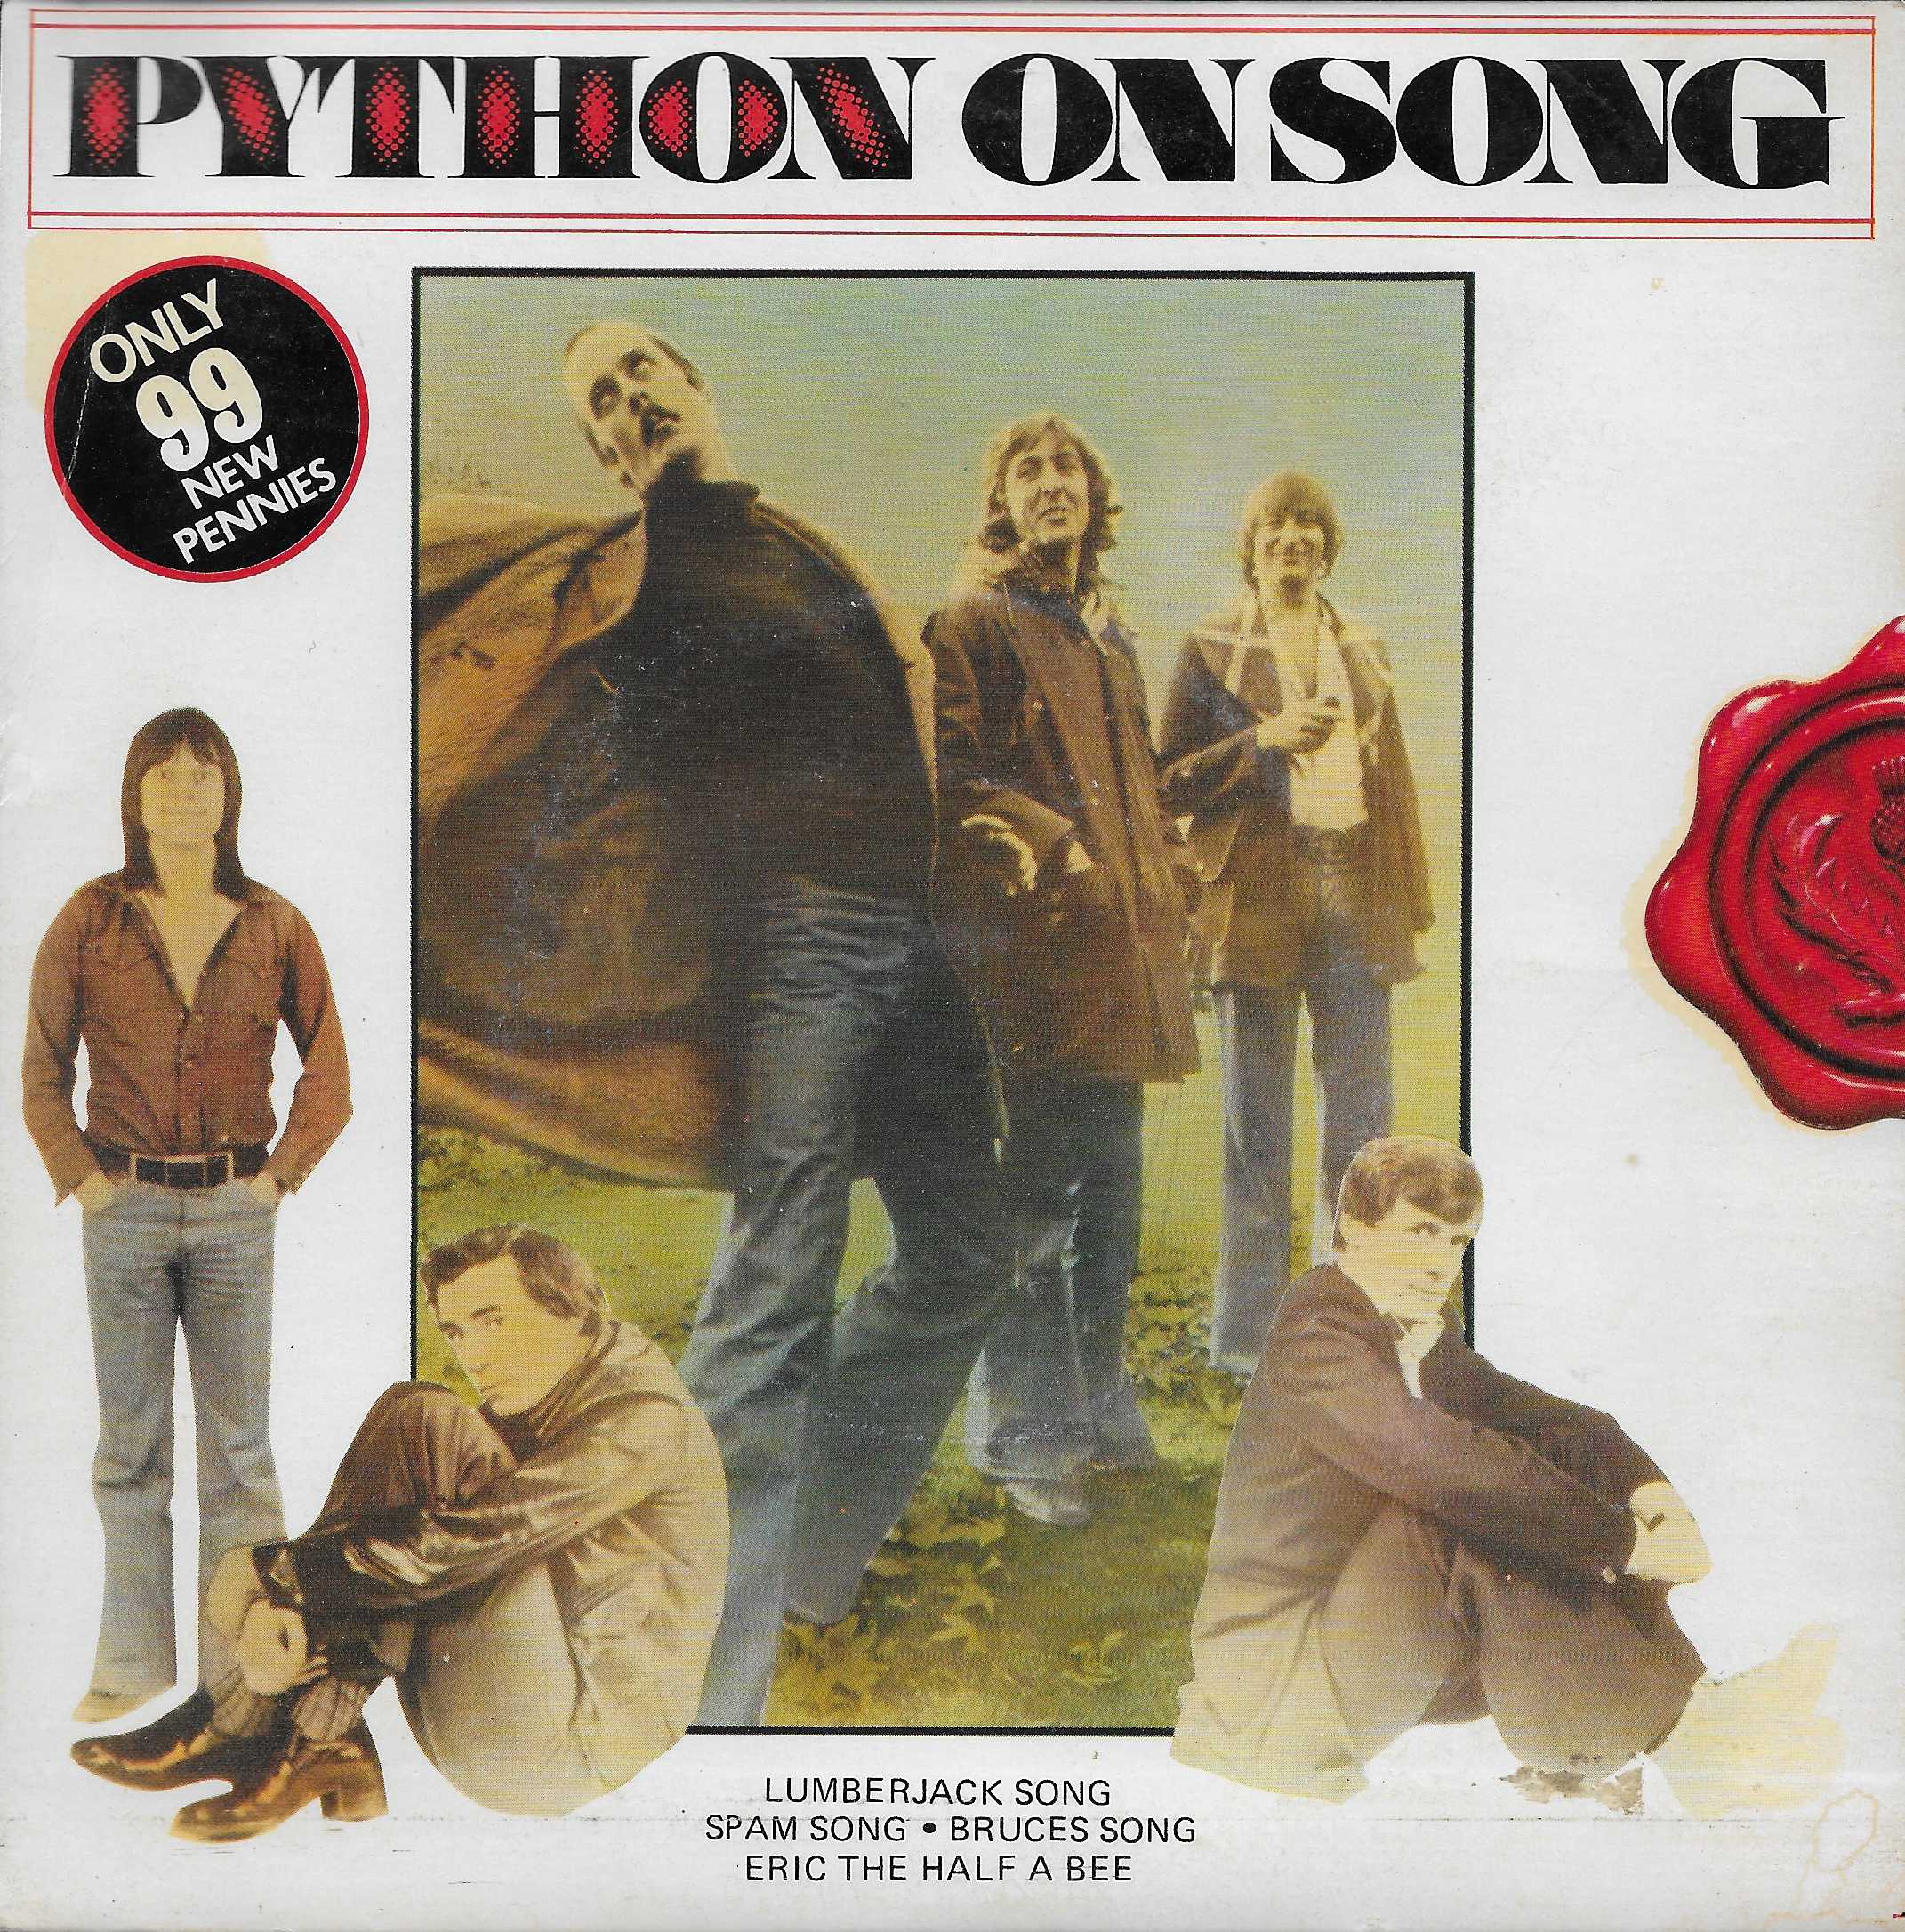 Picture of MP 001 Python on song (Monty Python's flying circus) by artist Monty Python from the BBC singles - Records and Tapes library